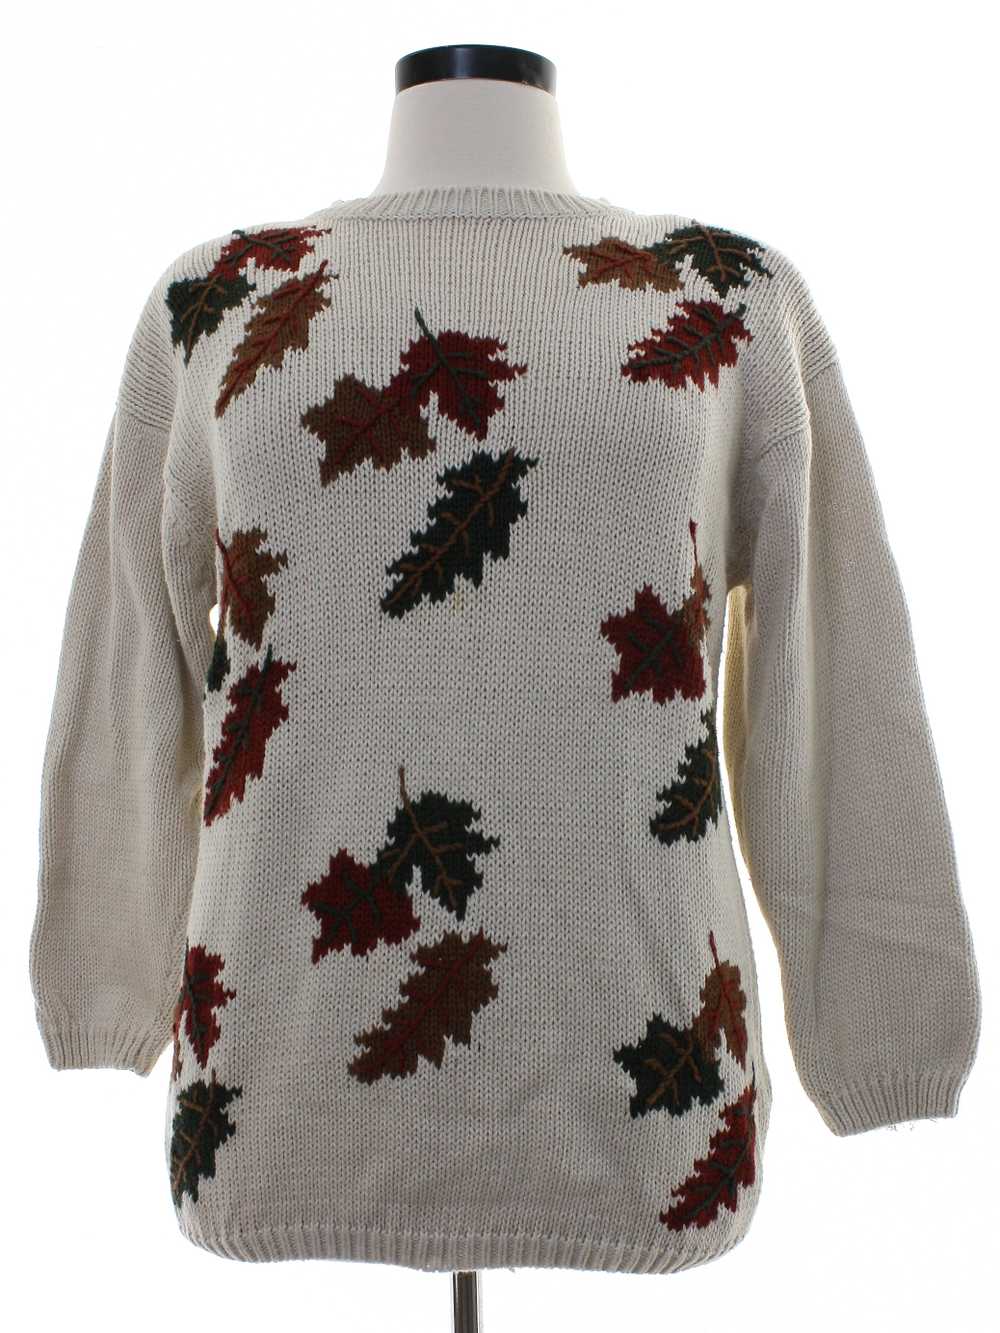 1980's Chrysantheme Womens Totally 80s Sweater - image 1